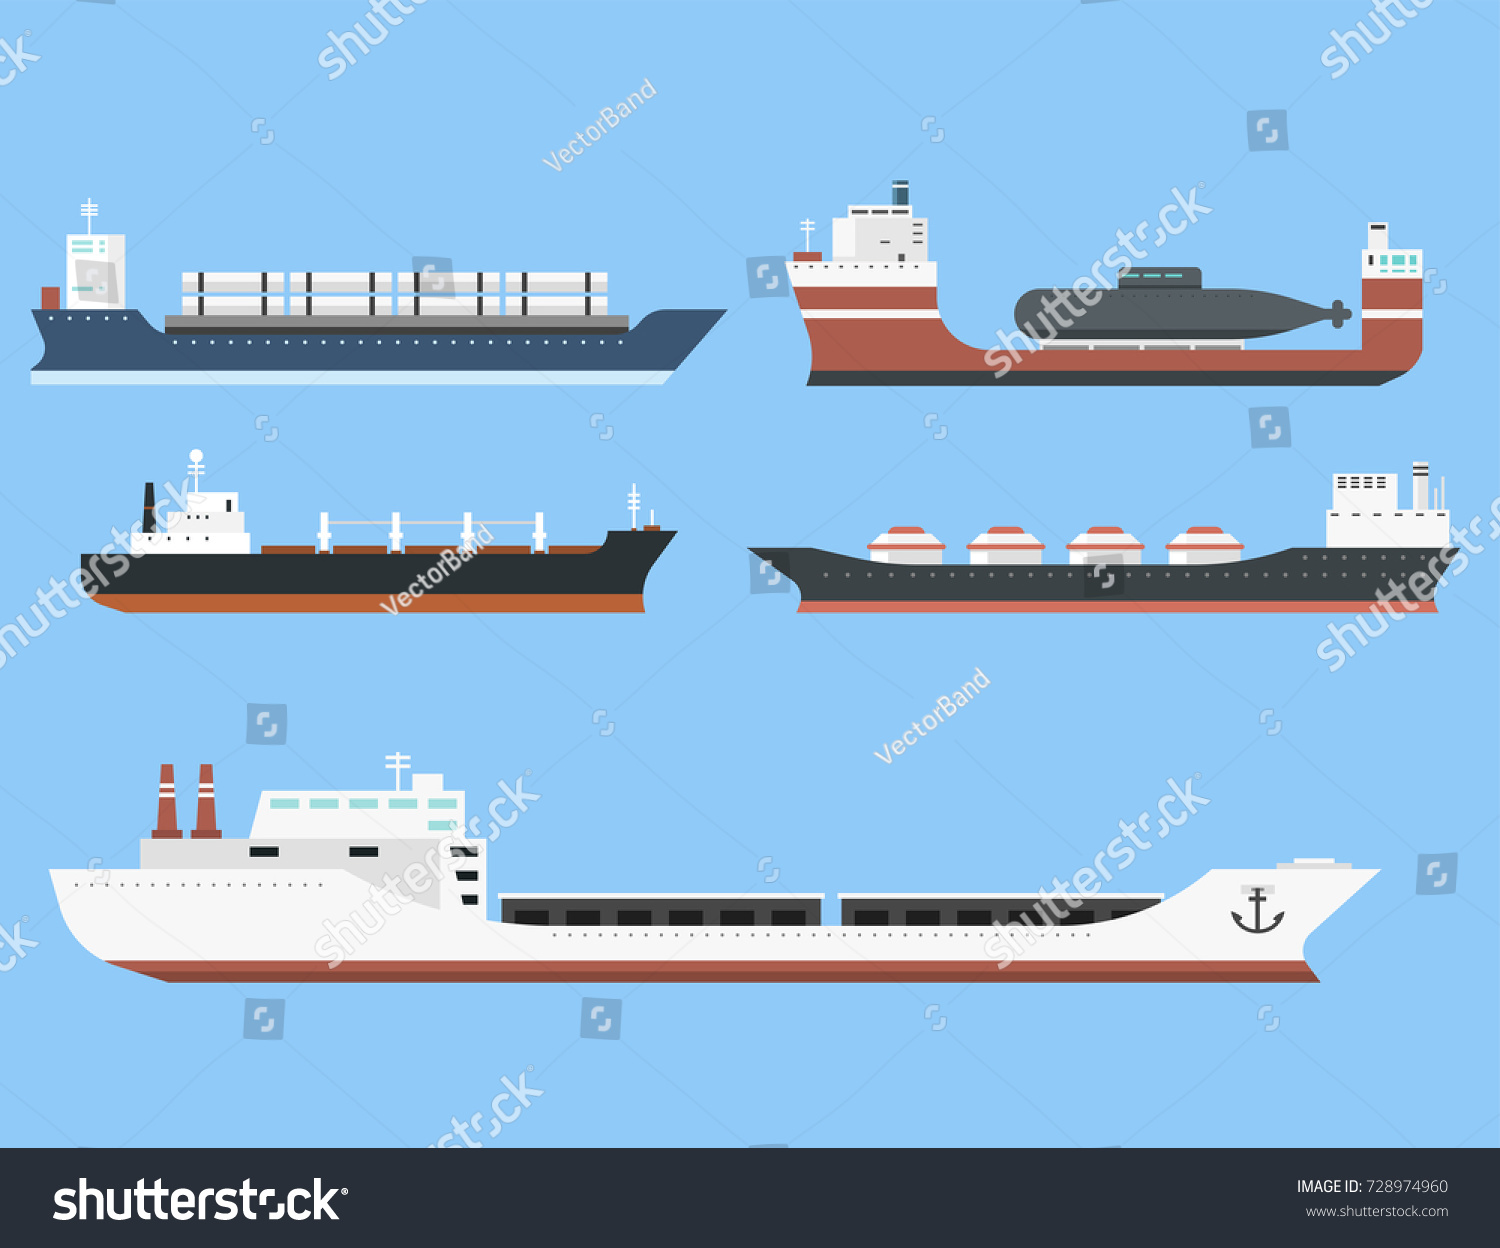 SVG of Cargo vessels and tankers shipping delivery bulk carrier train freight boat tankers isolated on background vector illustration svg